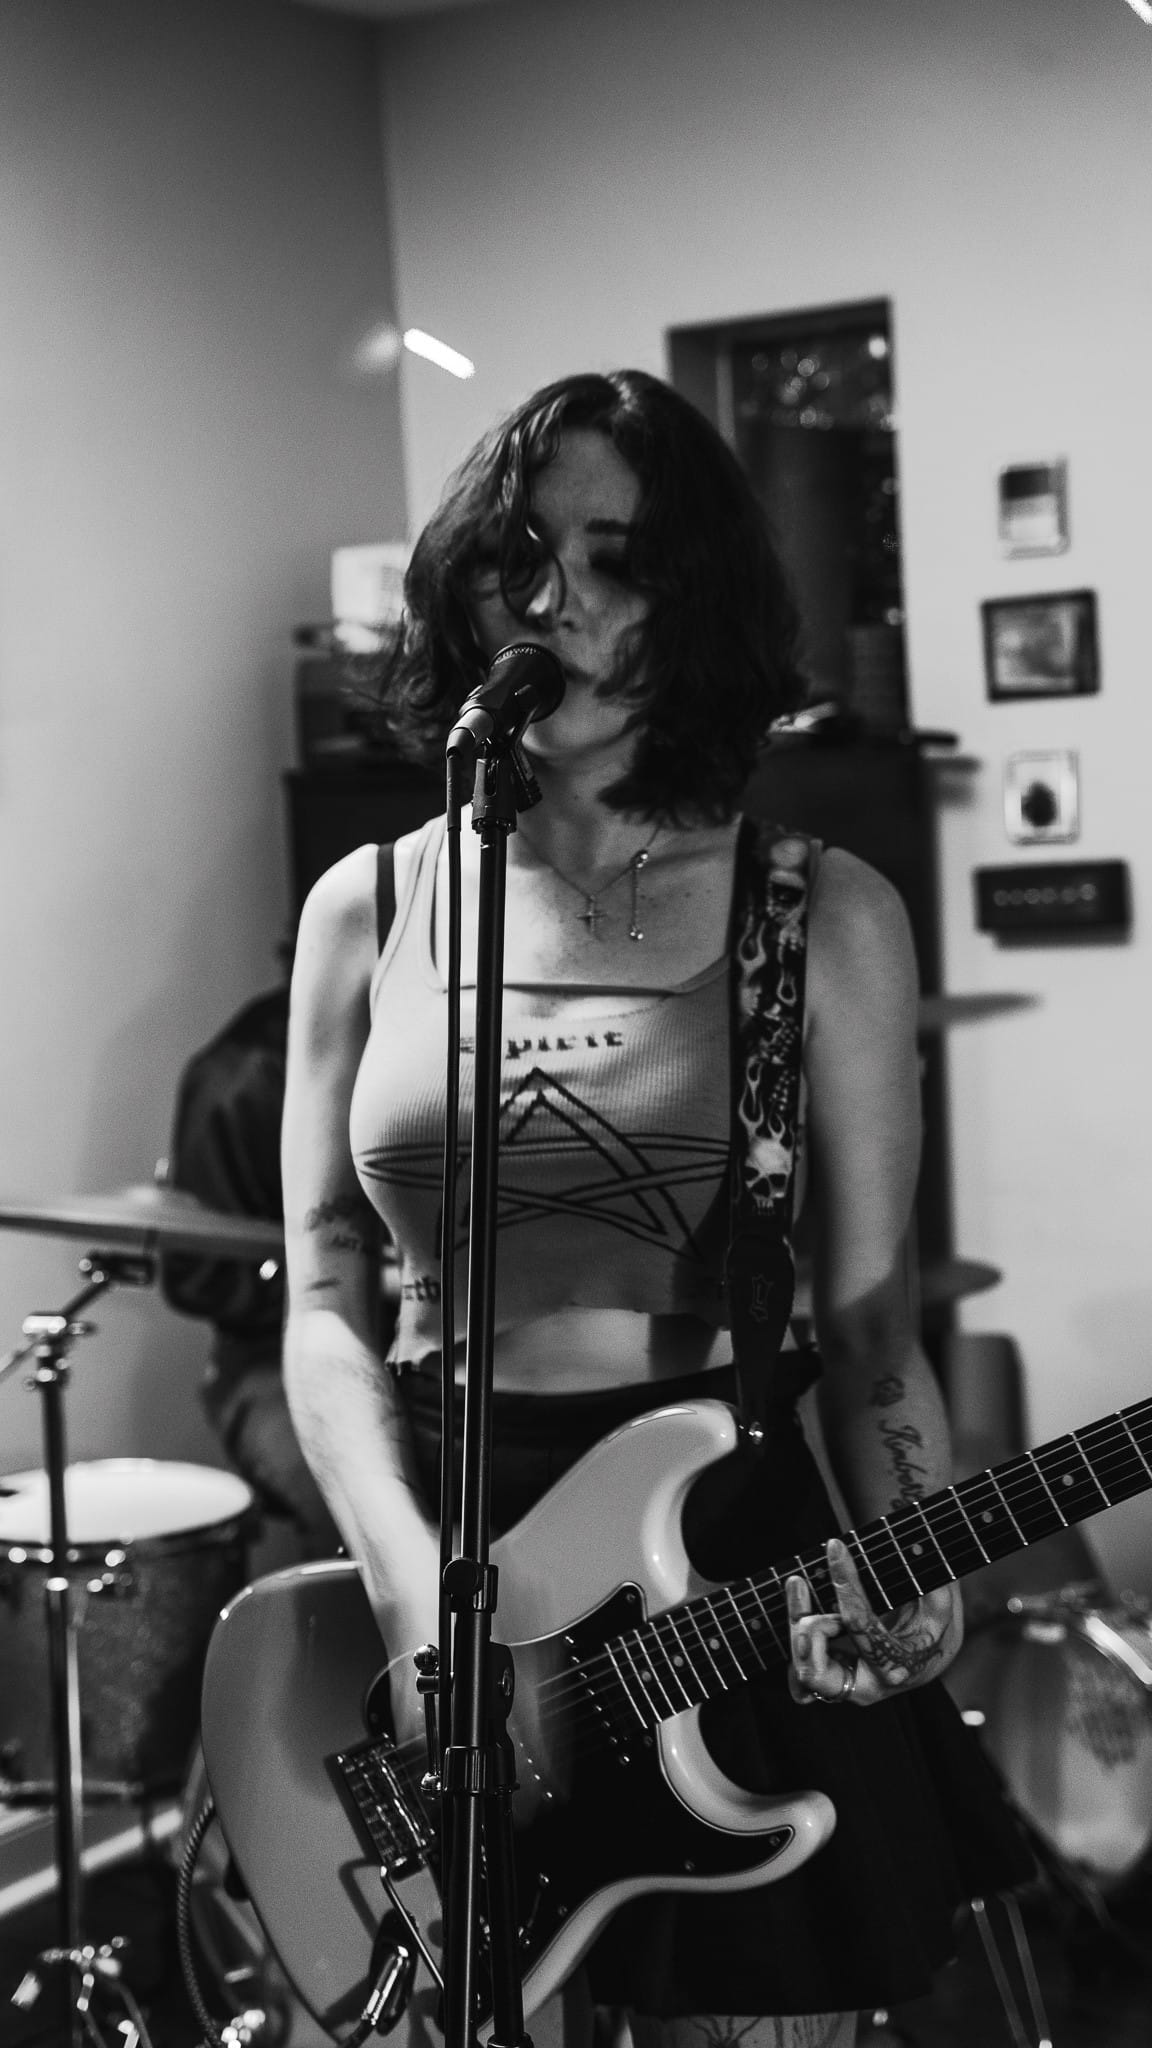 A black-and-white photo of a woman playing an electric guitar while singing into a microphone.